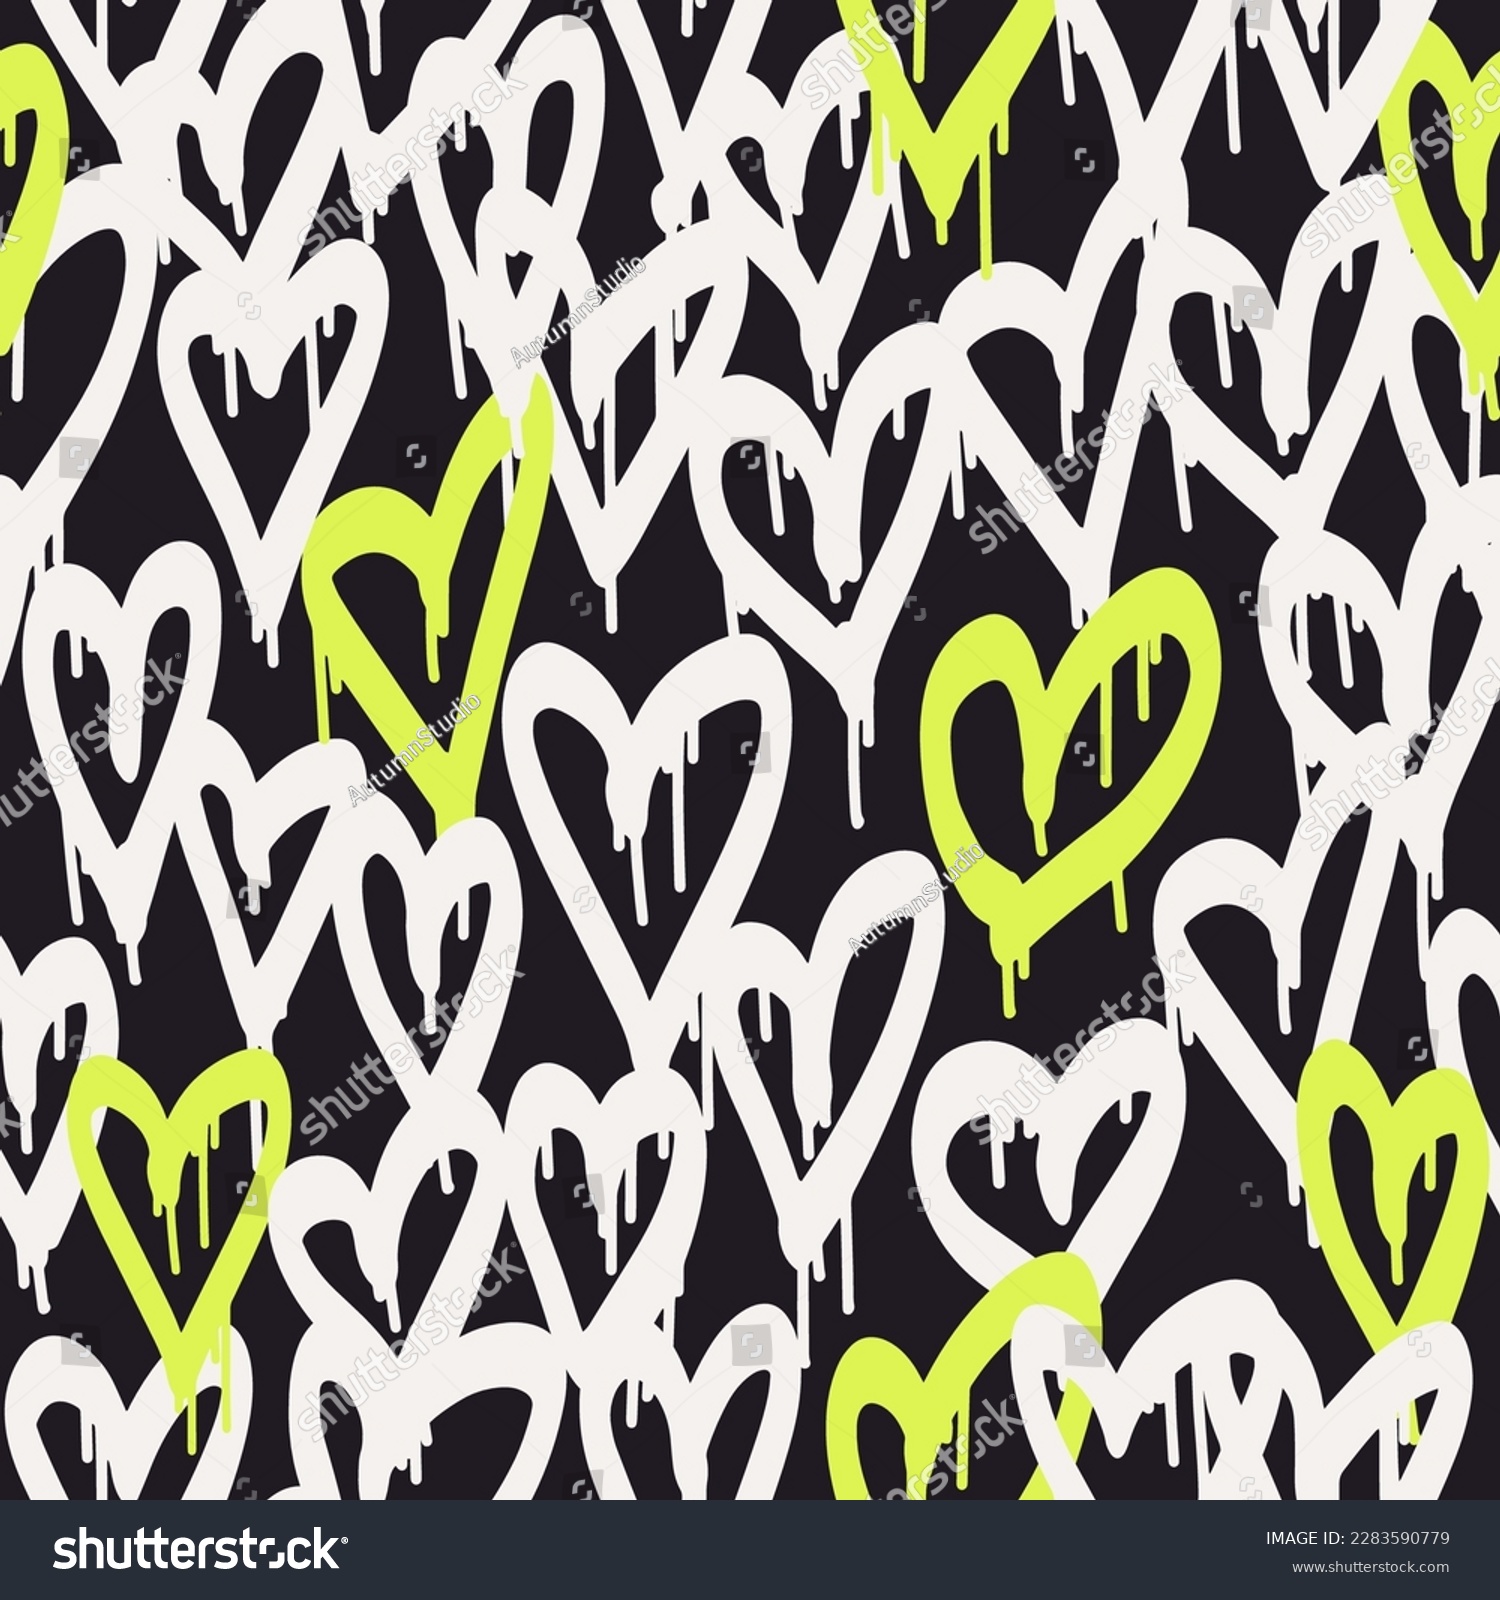 SVG of Graffiti hearts. Urban seamless pattern in street art style. Abstract print. Graphic underground unisex design for t-shirts and sweatshirt. Black and white street print with neon spray effect svg